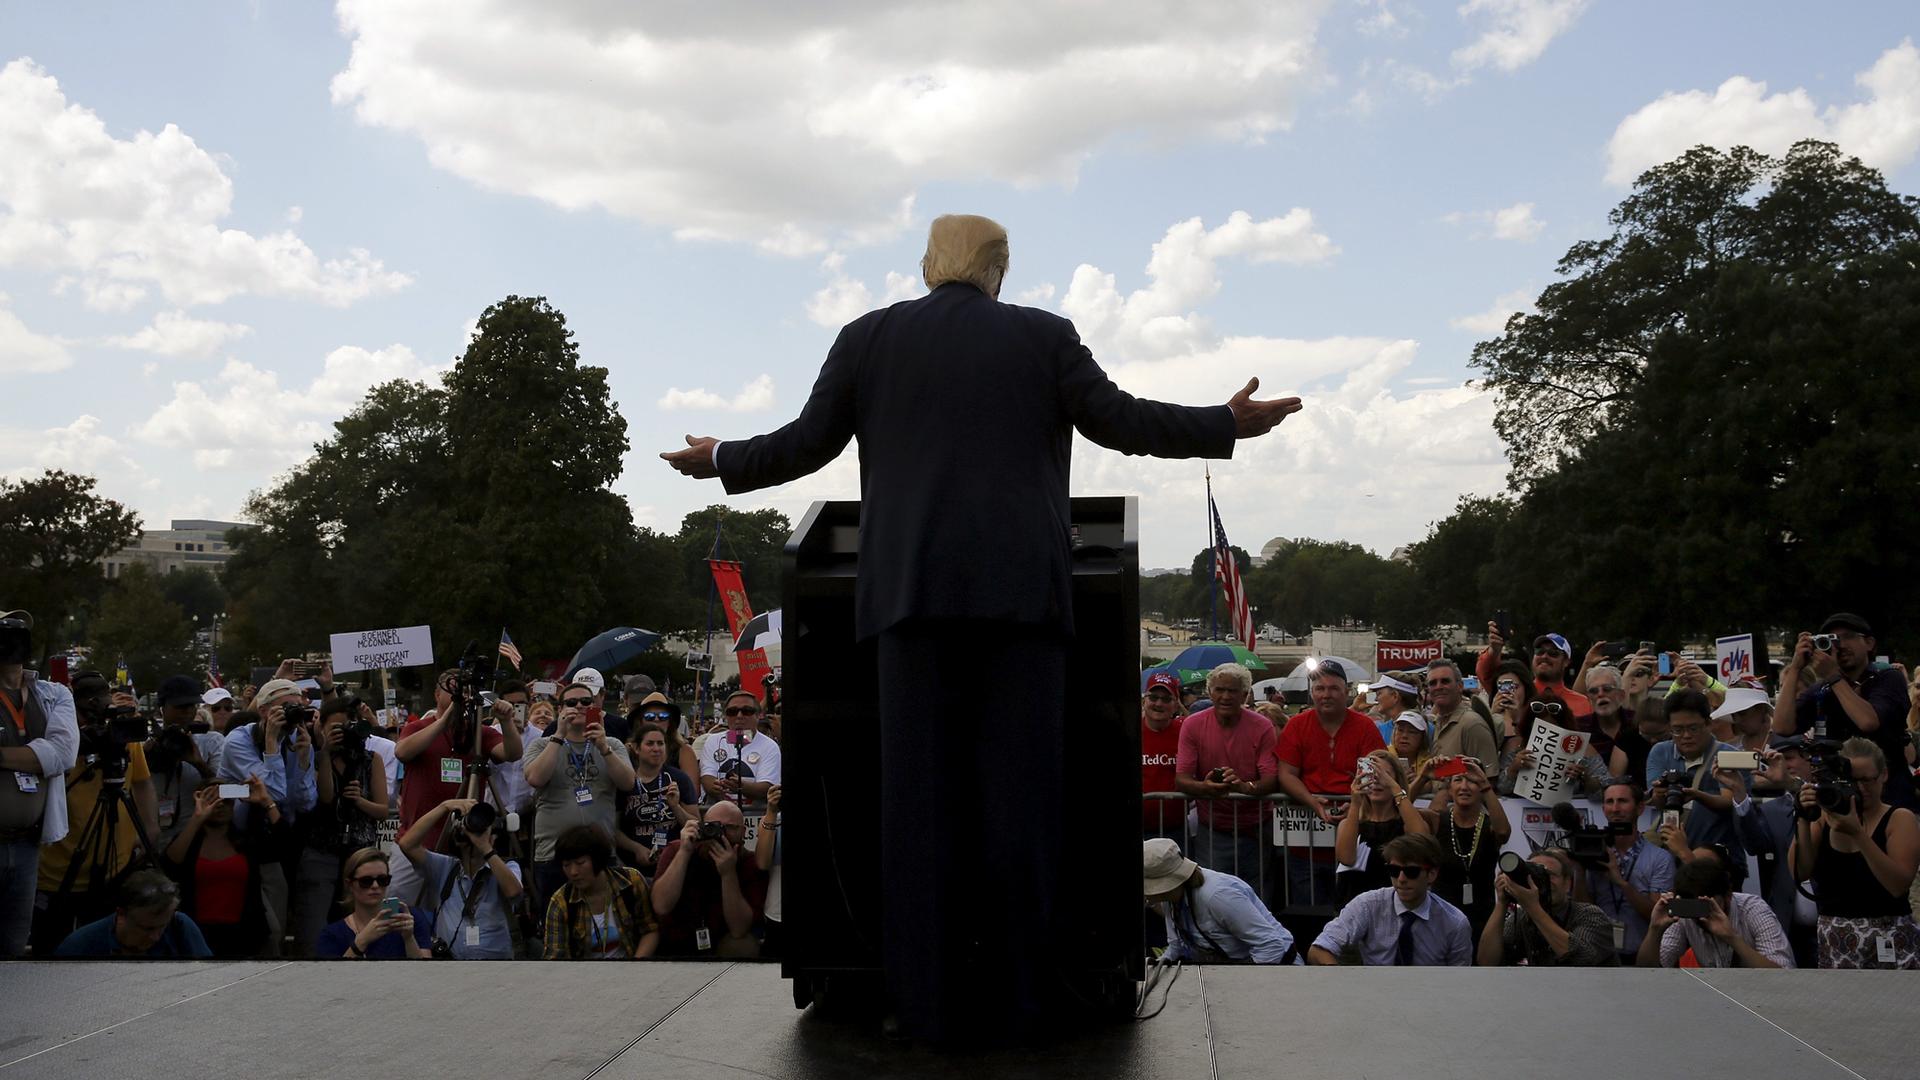 Then Republican presidential candidate Donald Trump addressing a Tea Party rally against the Iran nuclear deal in Washington, 2015.